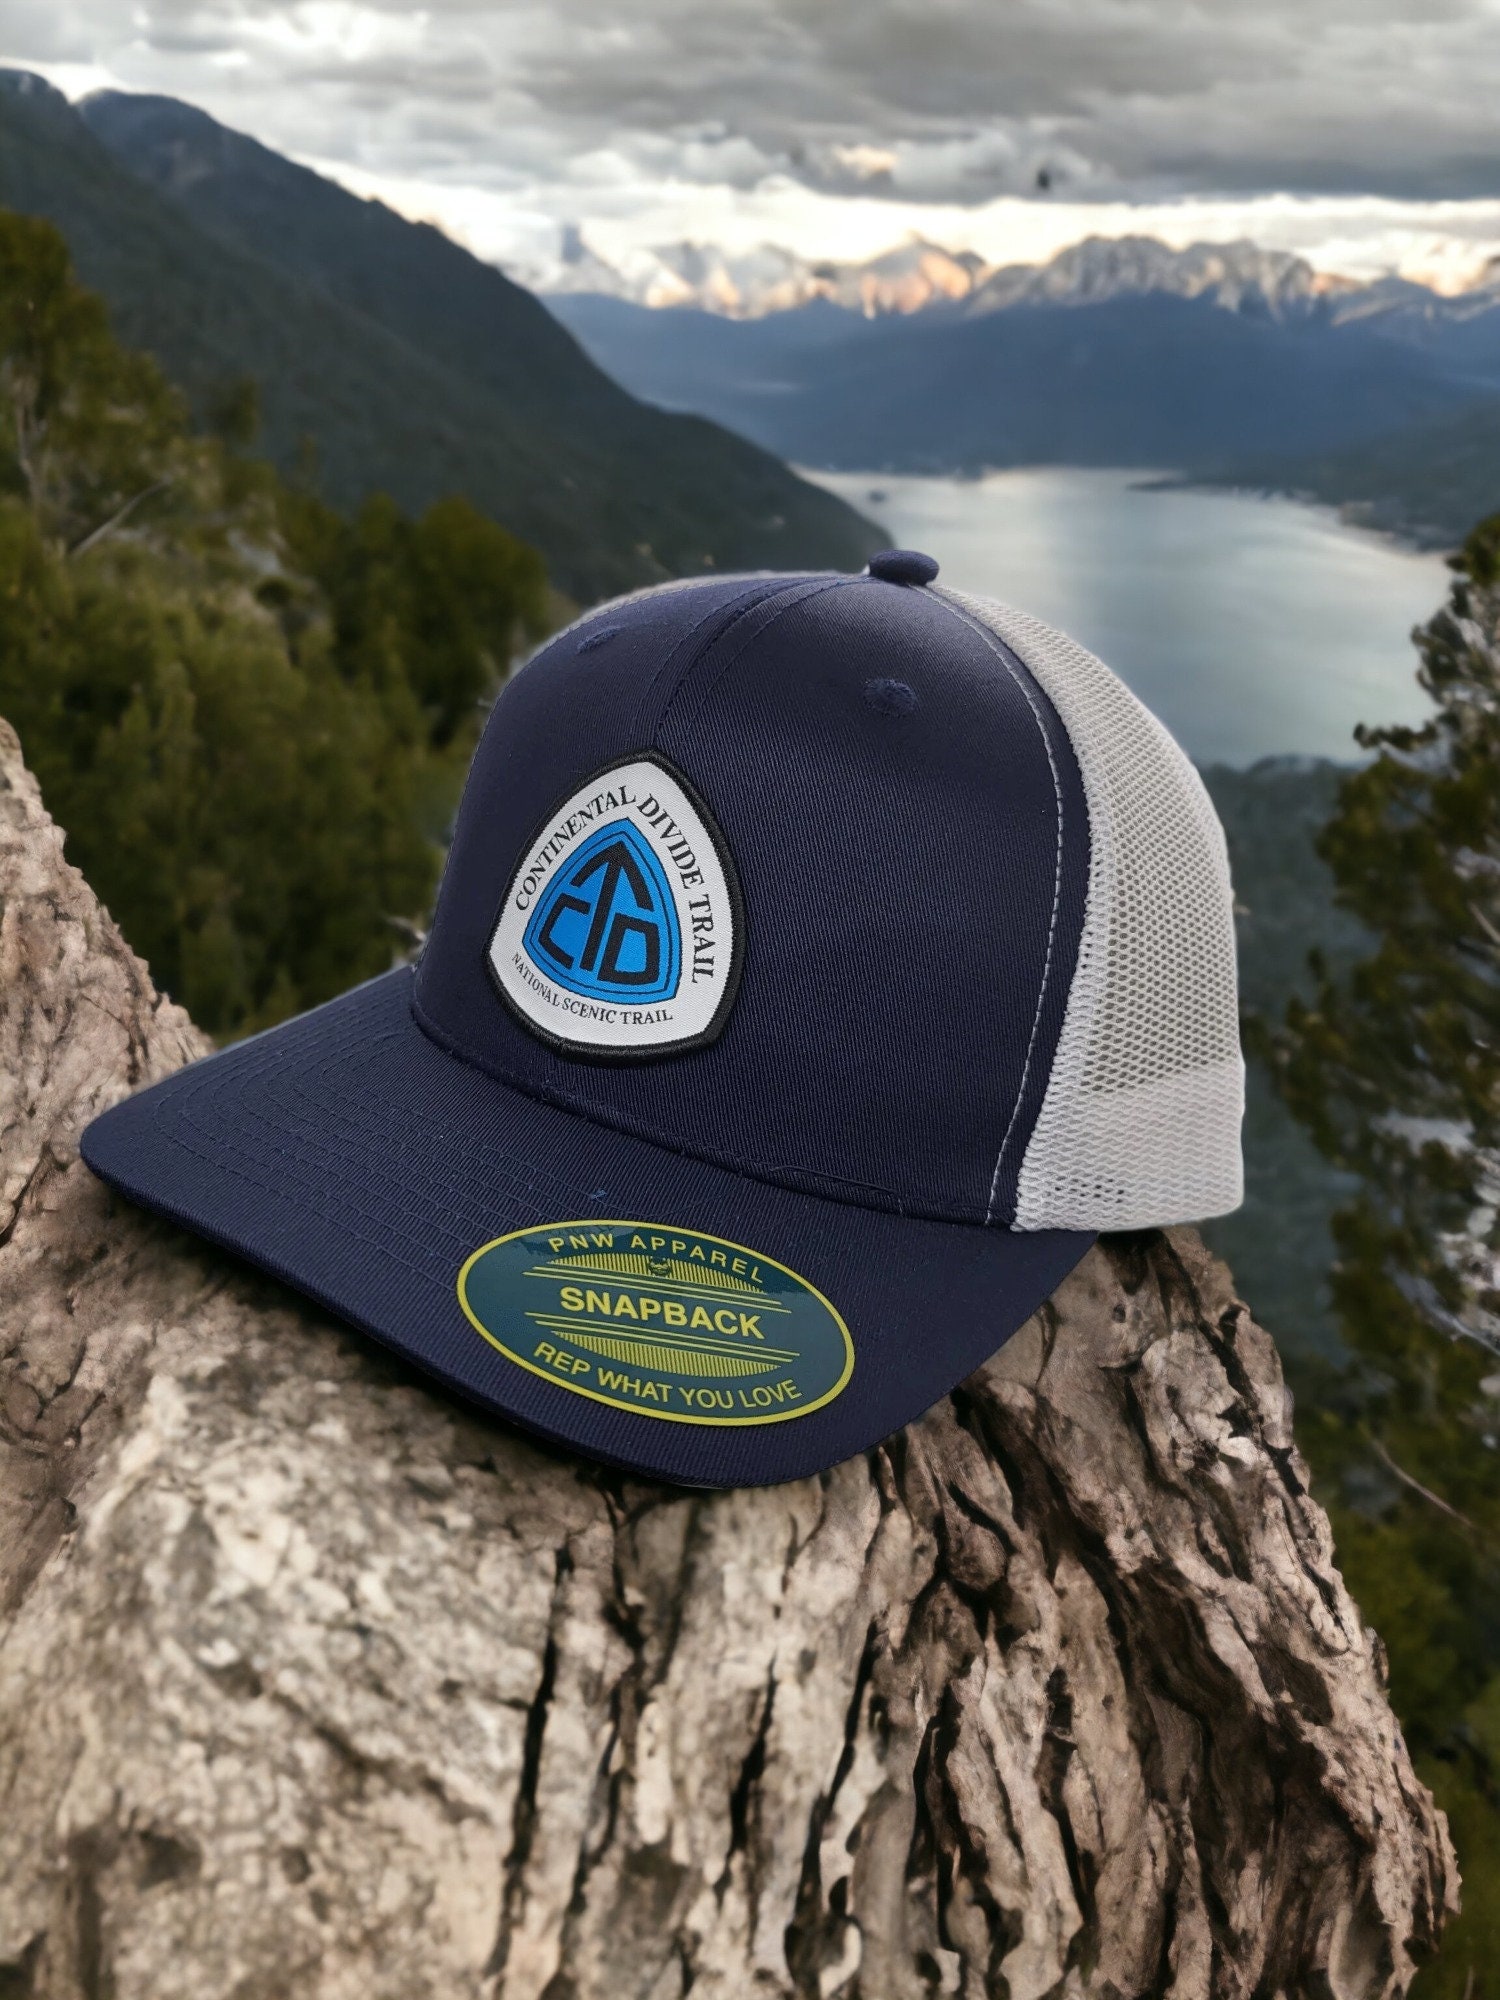 Continental Divide Trail Trucker Hat with CDT Official Patch